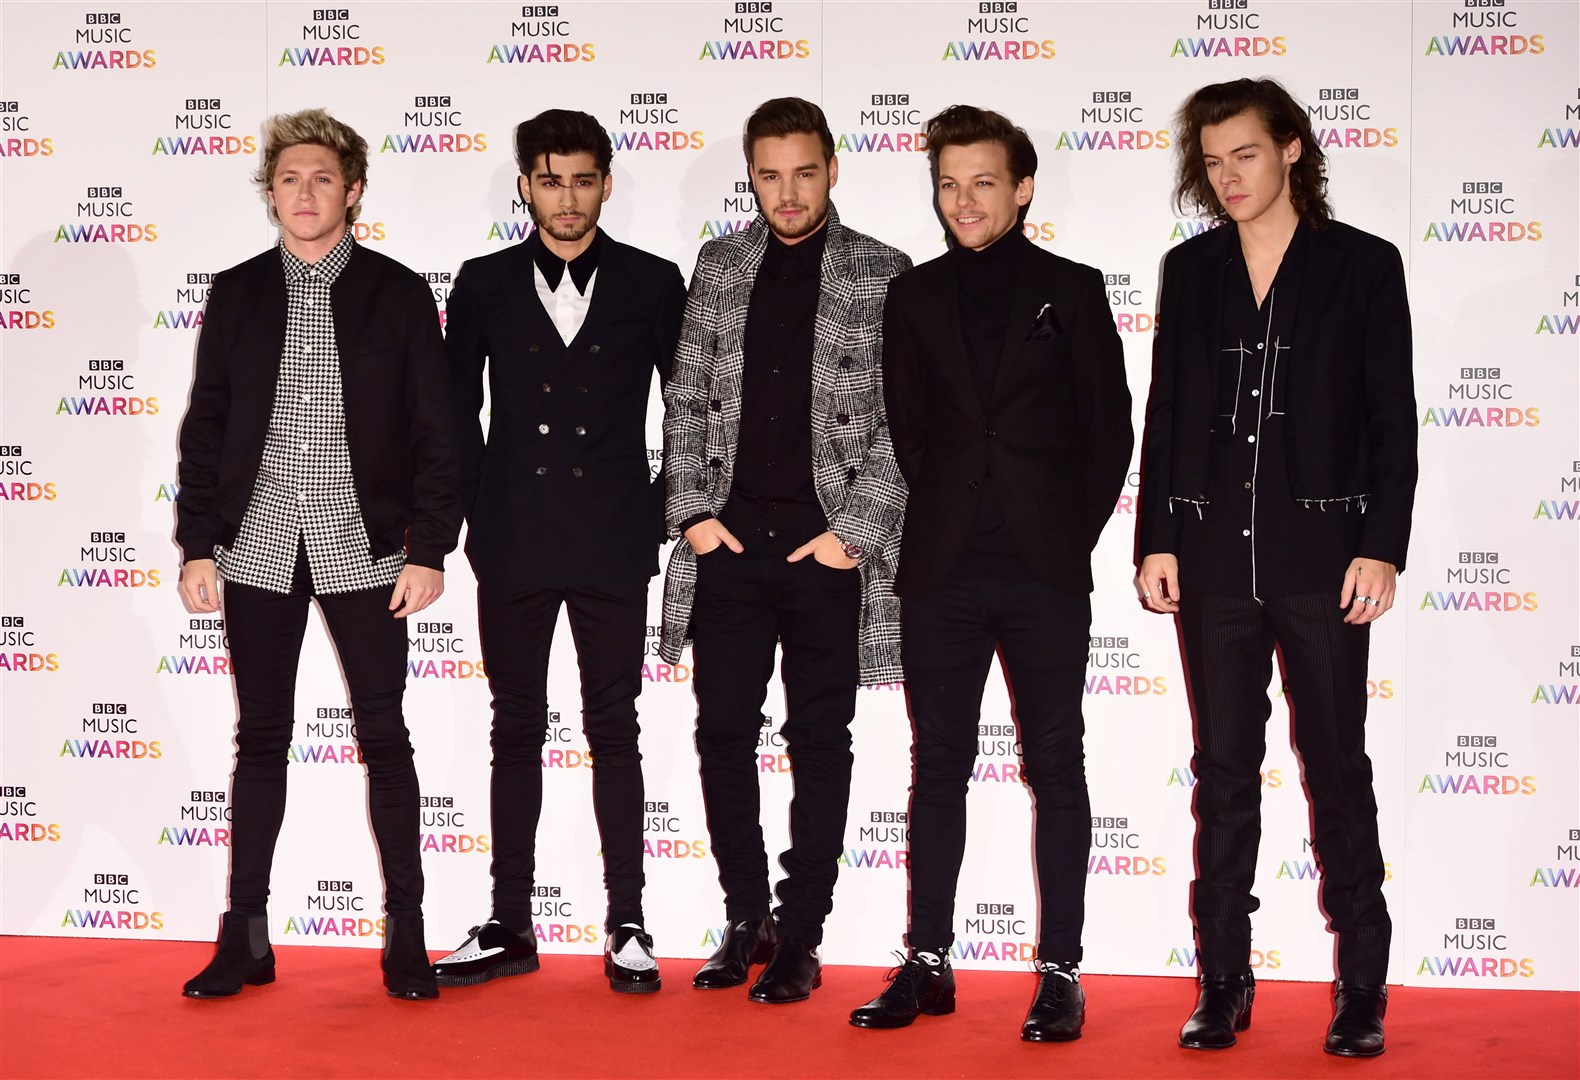 Niall Horan, Zayn Malik, Liam Payne, Louis Tomlinson and Harry Styles from One Direction (Ian West/PA)